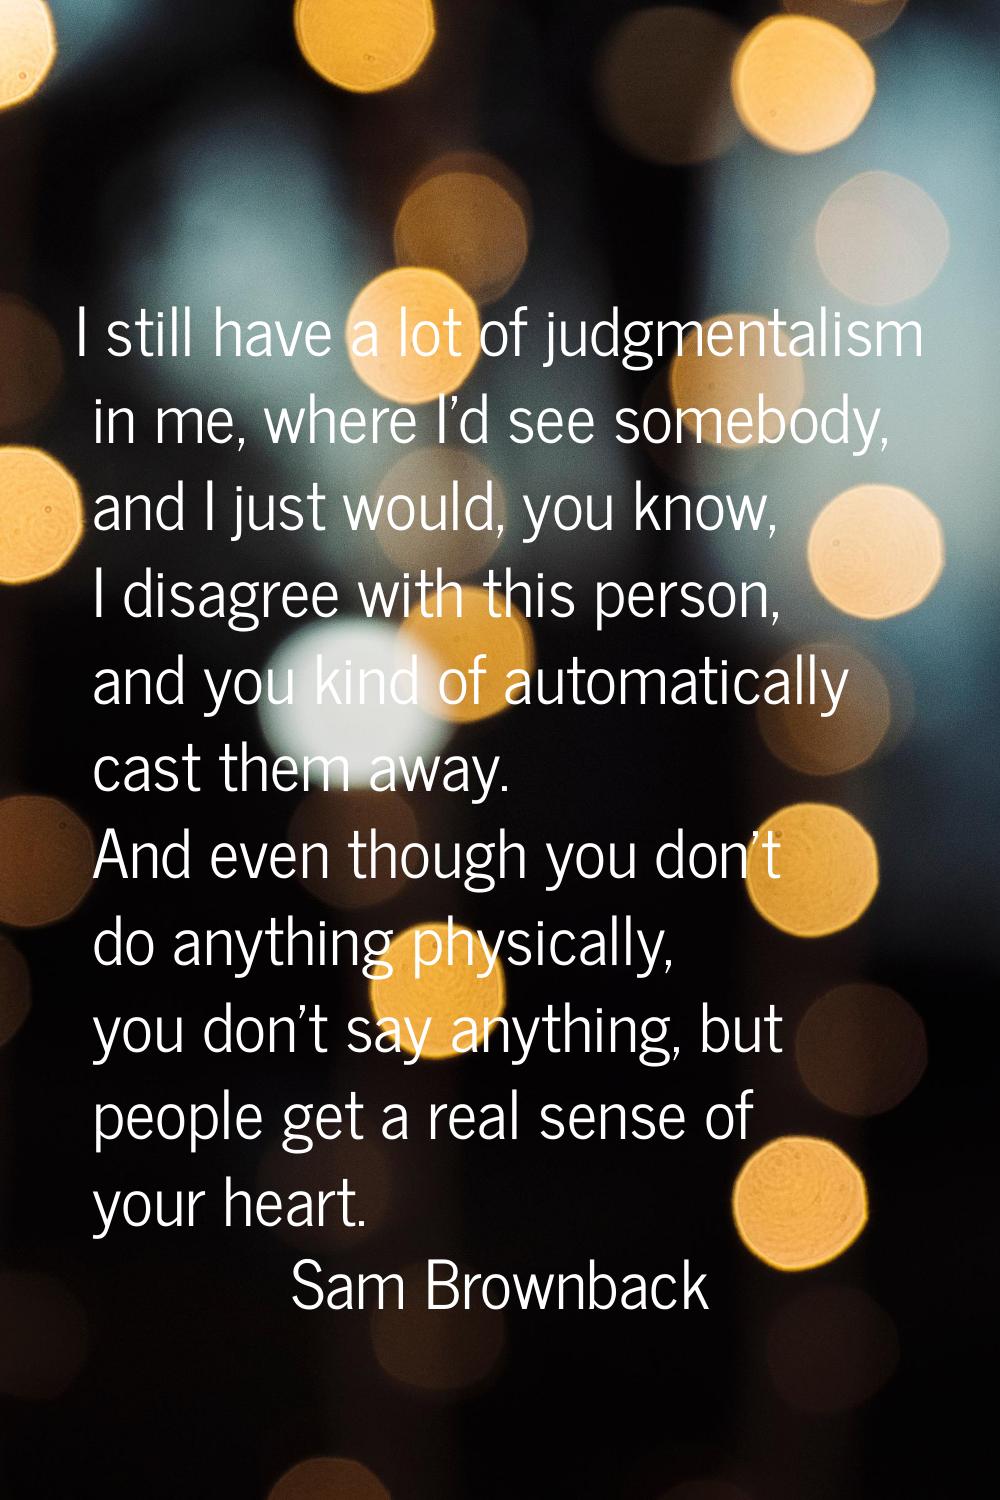 I still have a lot of judgmentalism in me, where I'd see somebody, and I just would, you know, I di